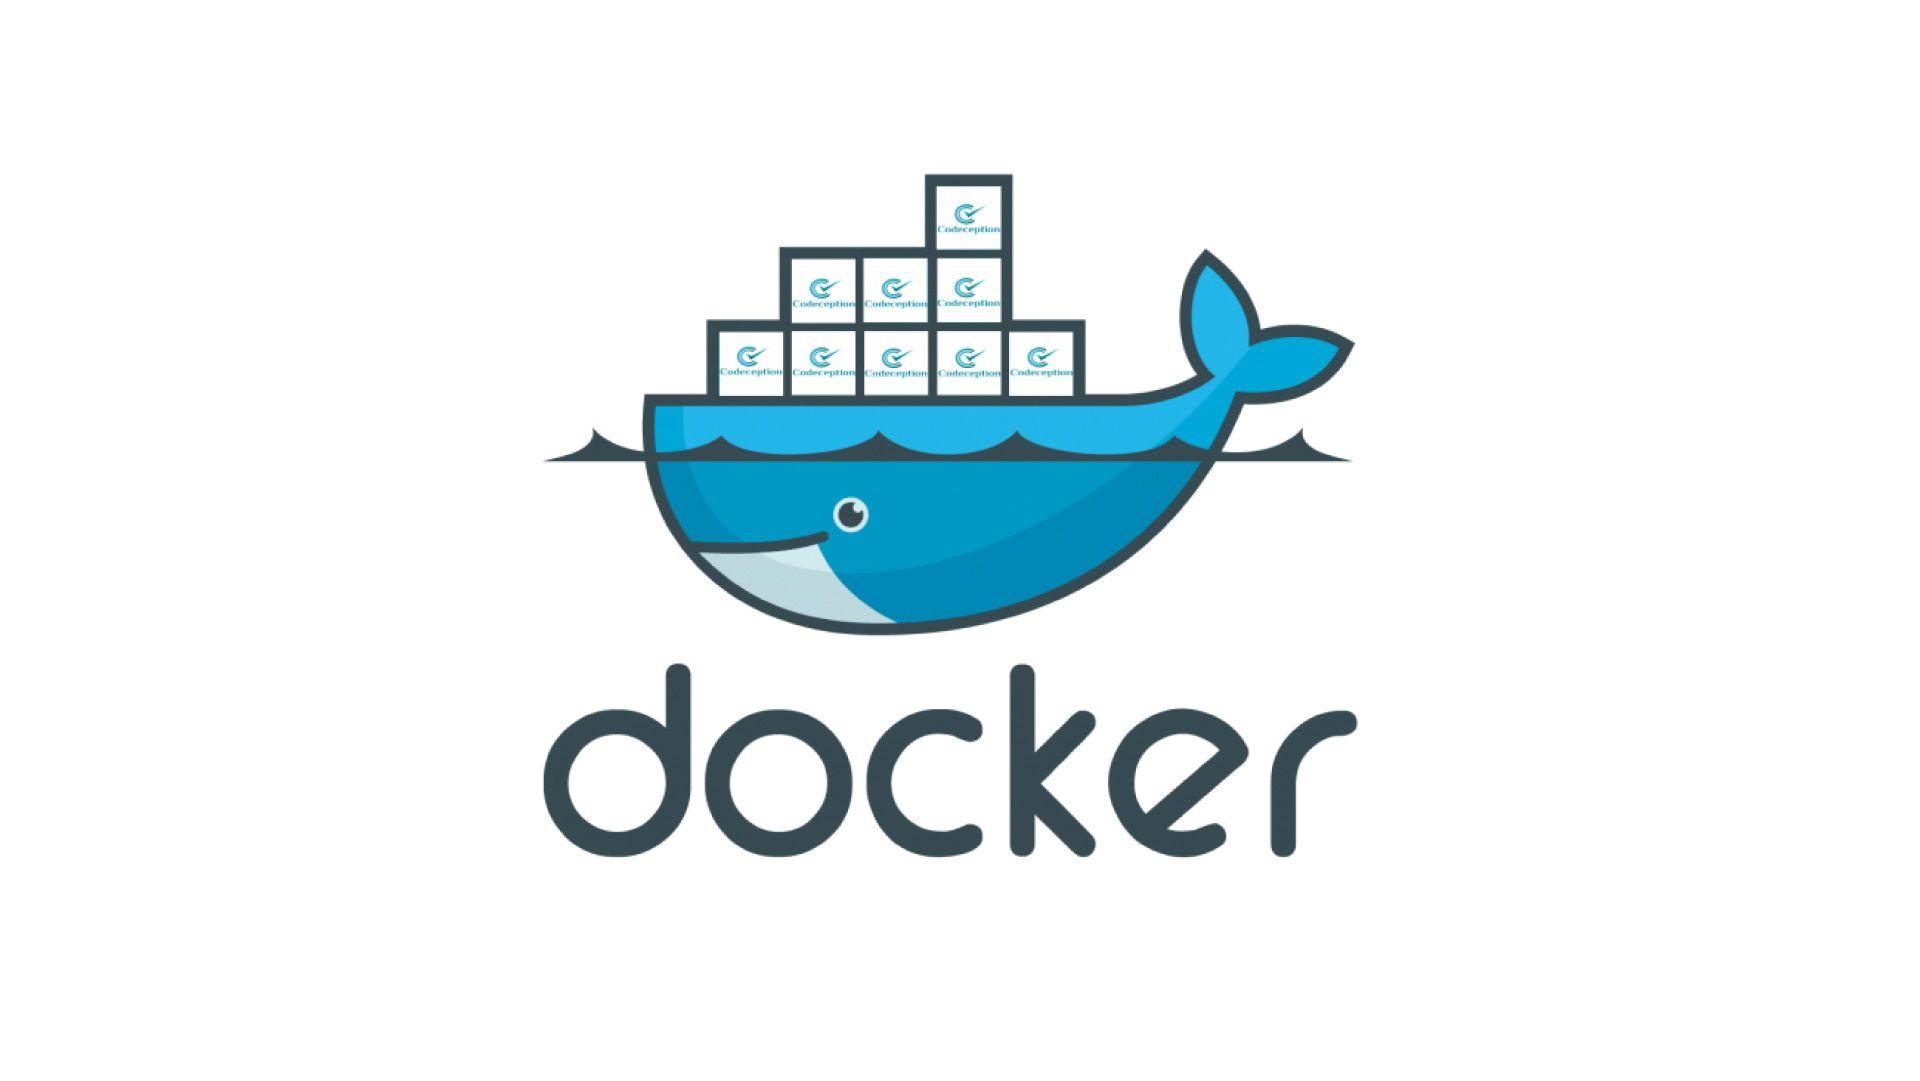 Docker Logo - Codeception - how to start automatic tests using docker-console ...